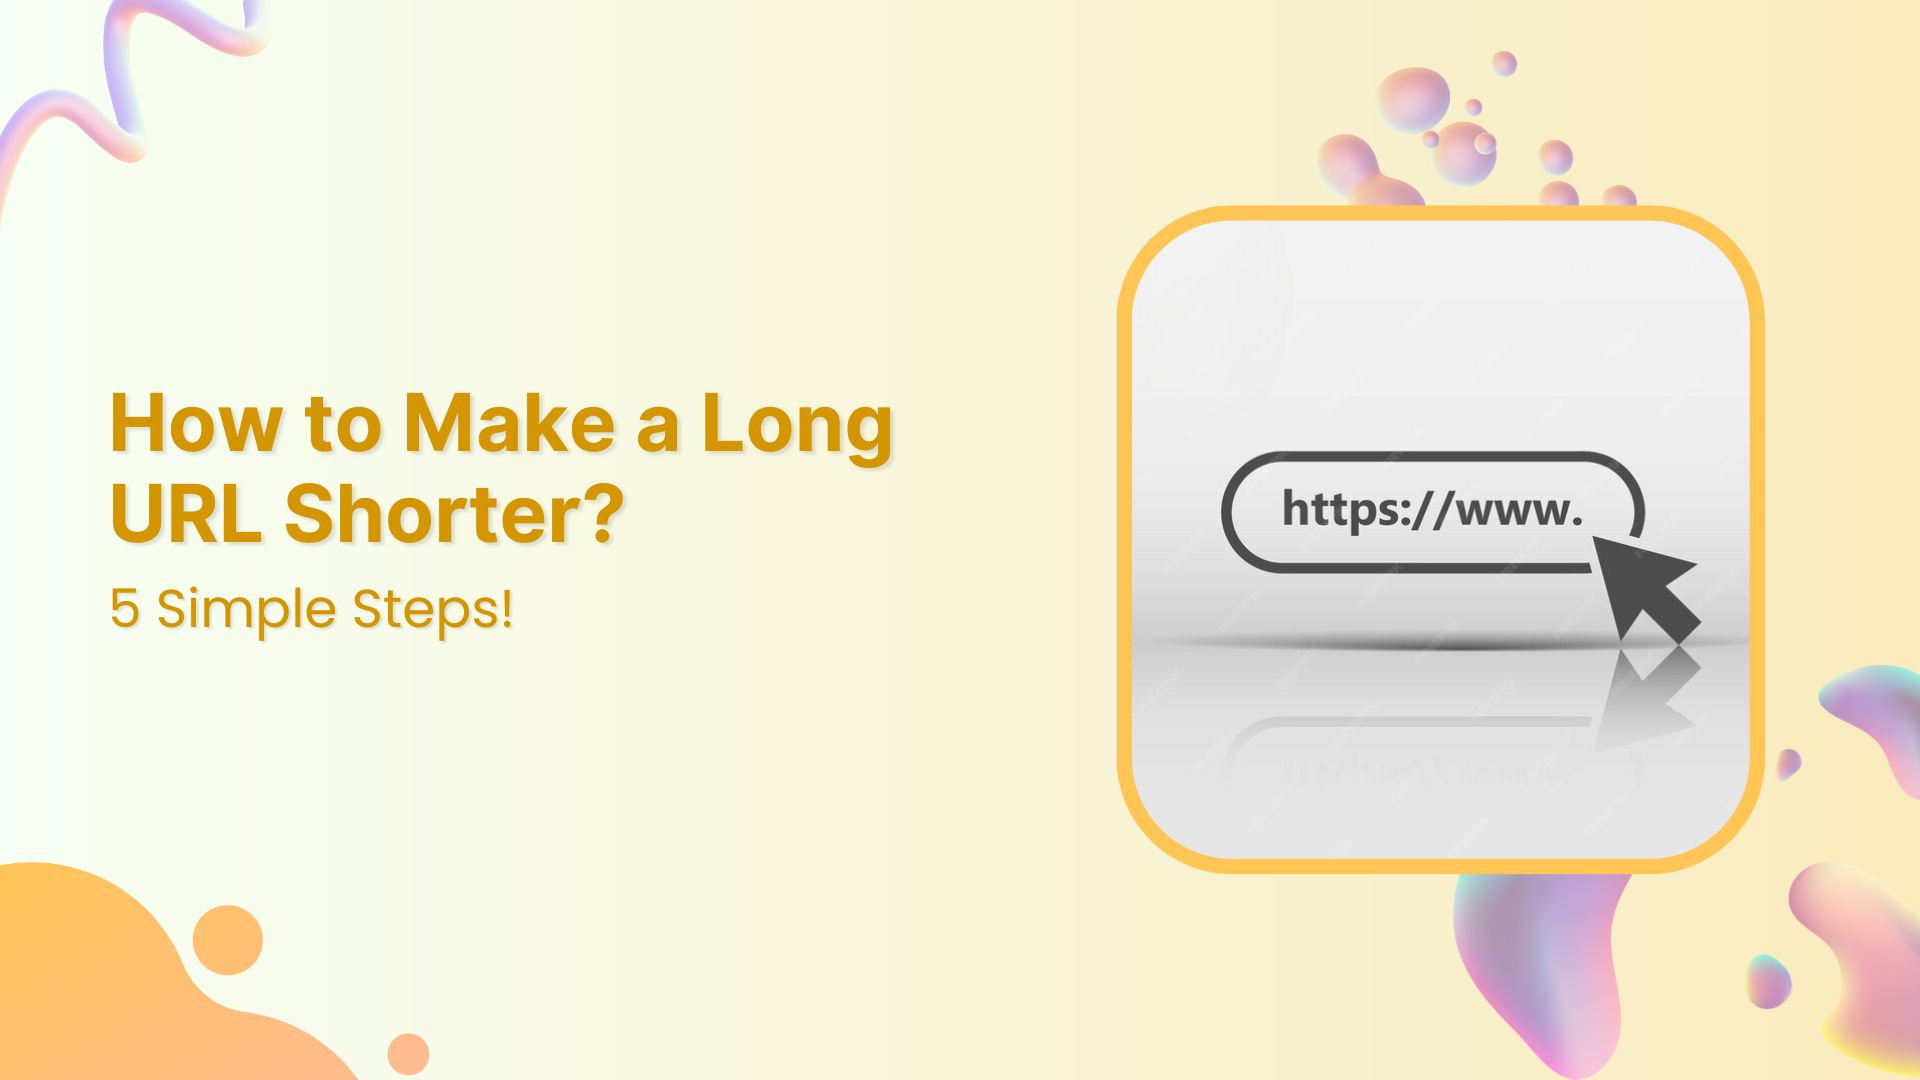 How to Make a Long URL Shorter: 5 Simple Steps